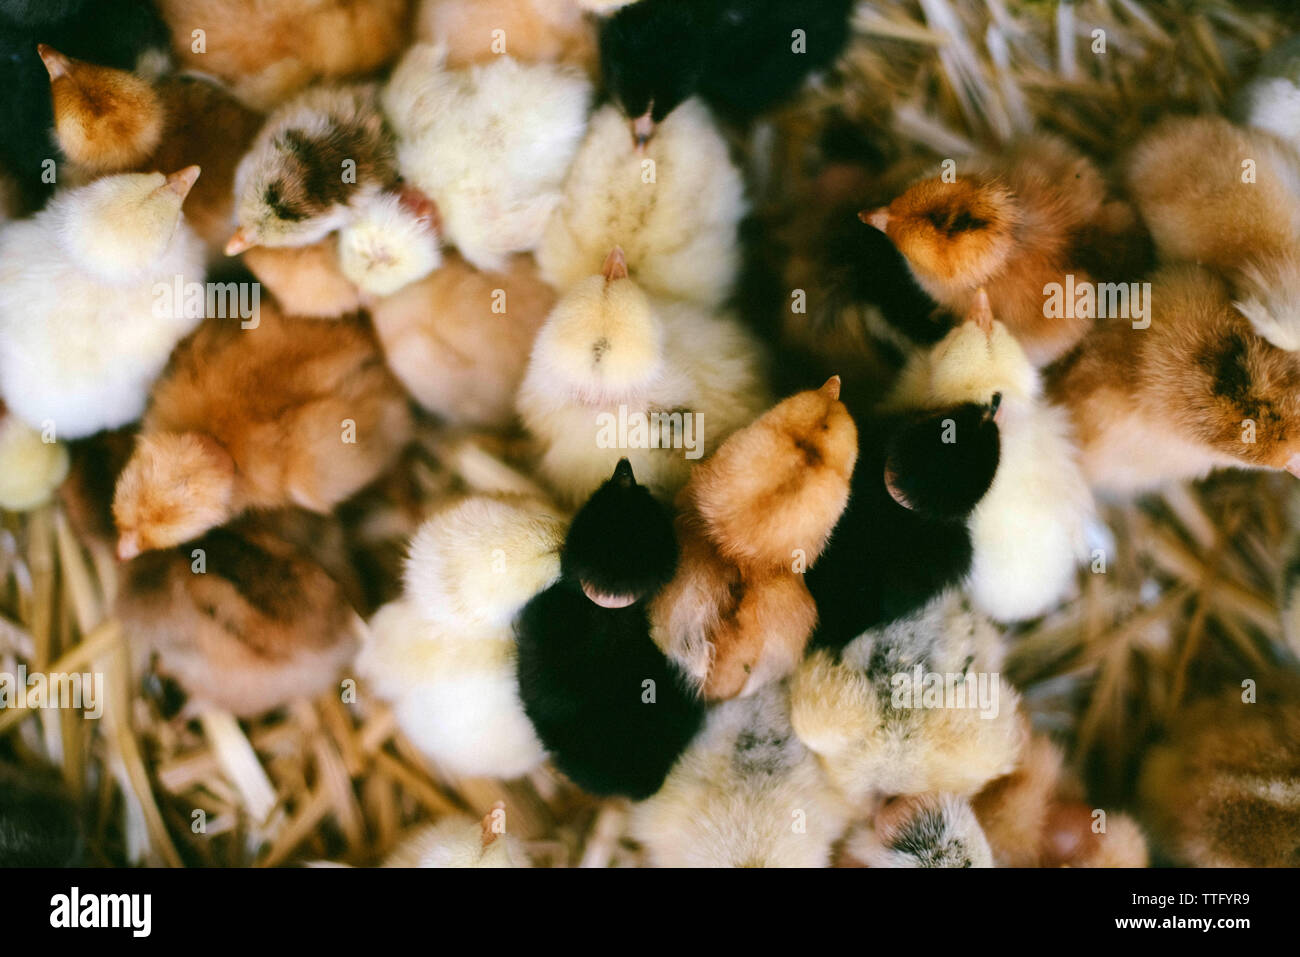 Close-up of adorable baby chicks in a  box. View from above. Stock Photo